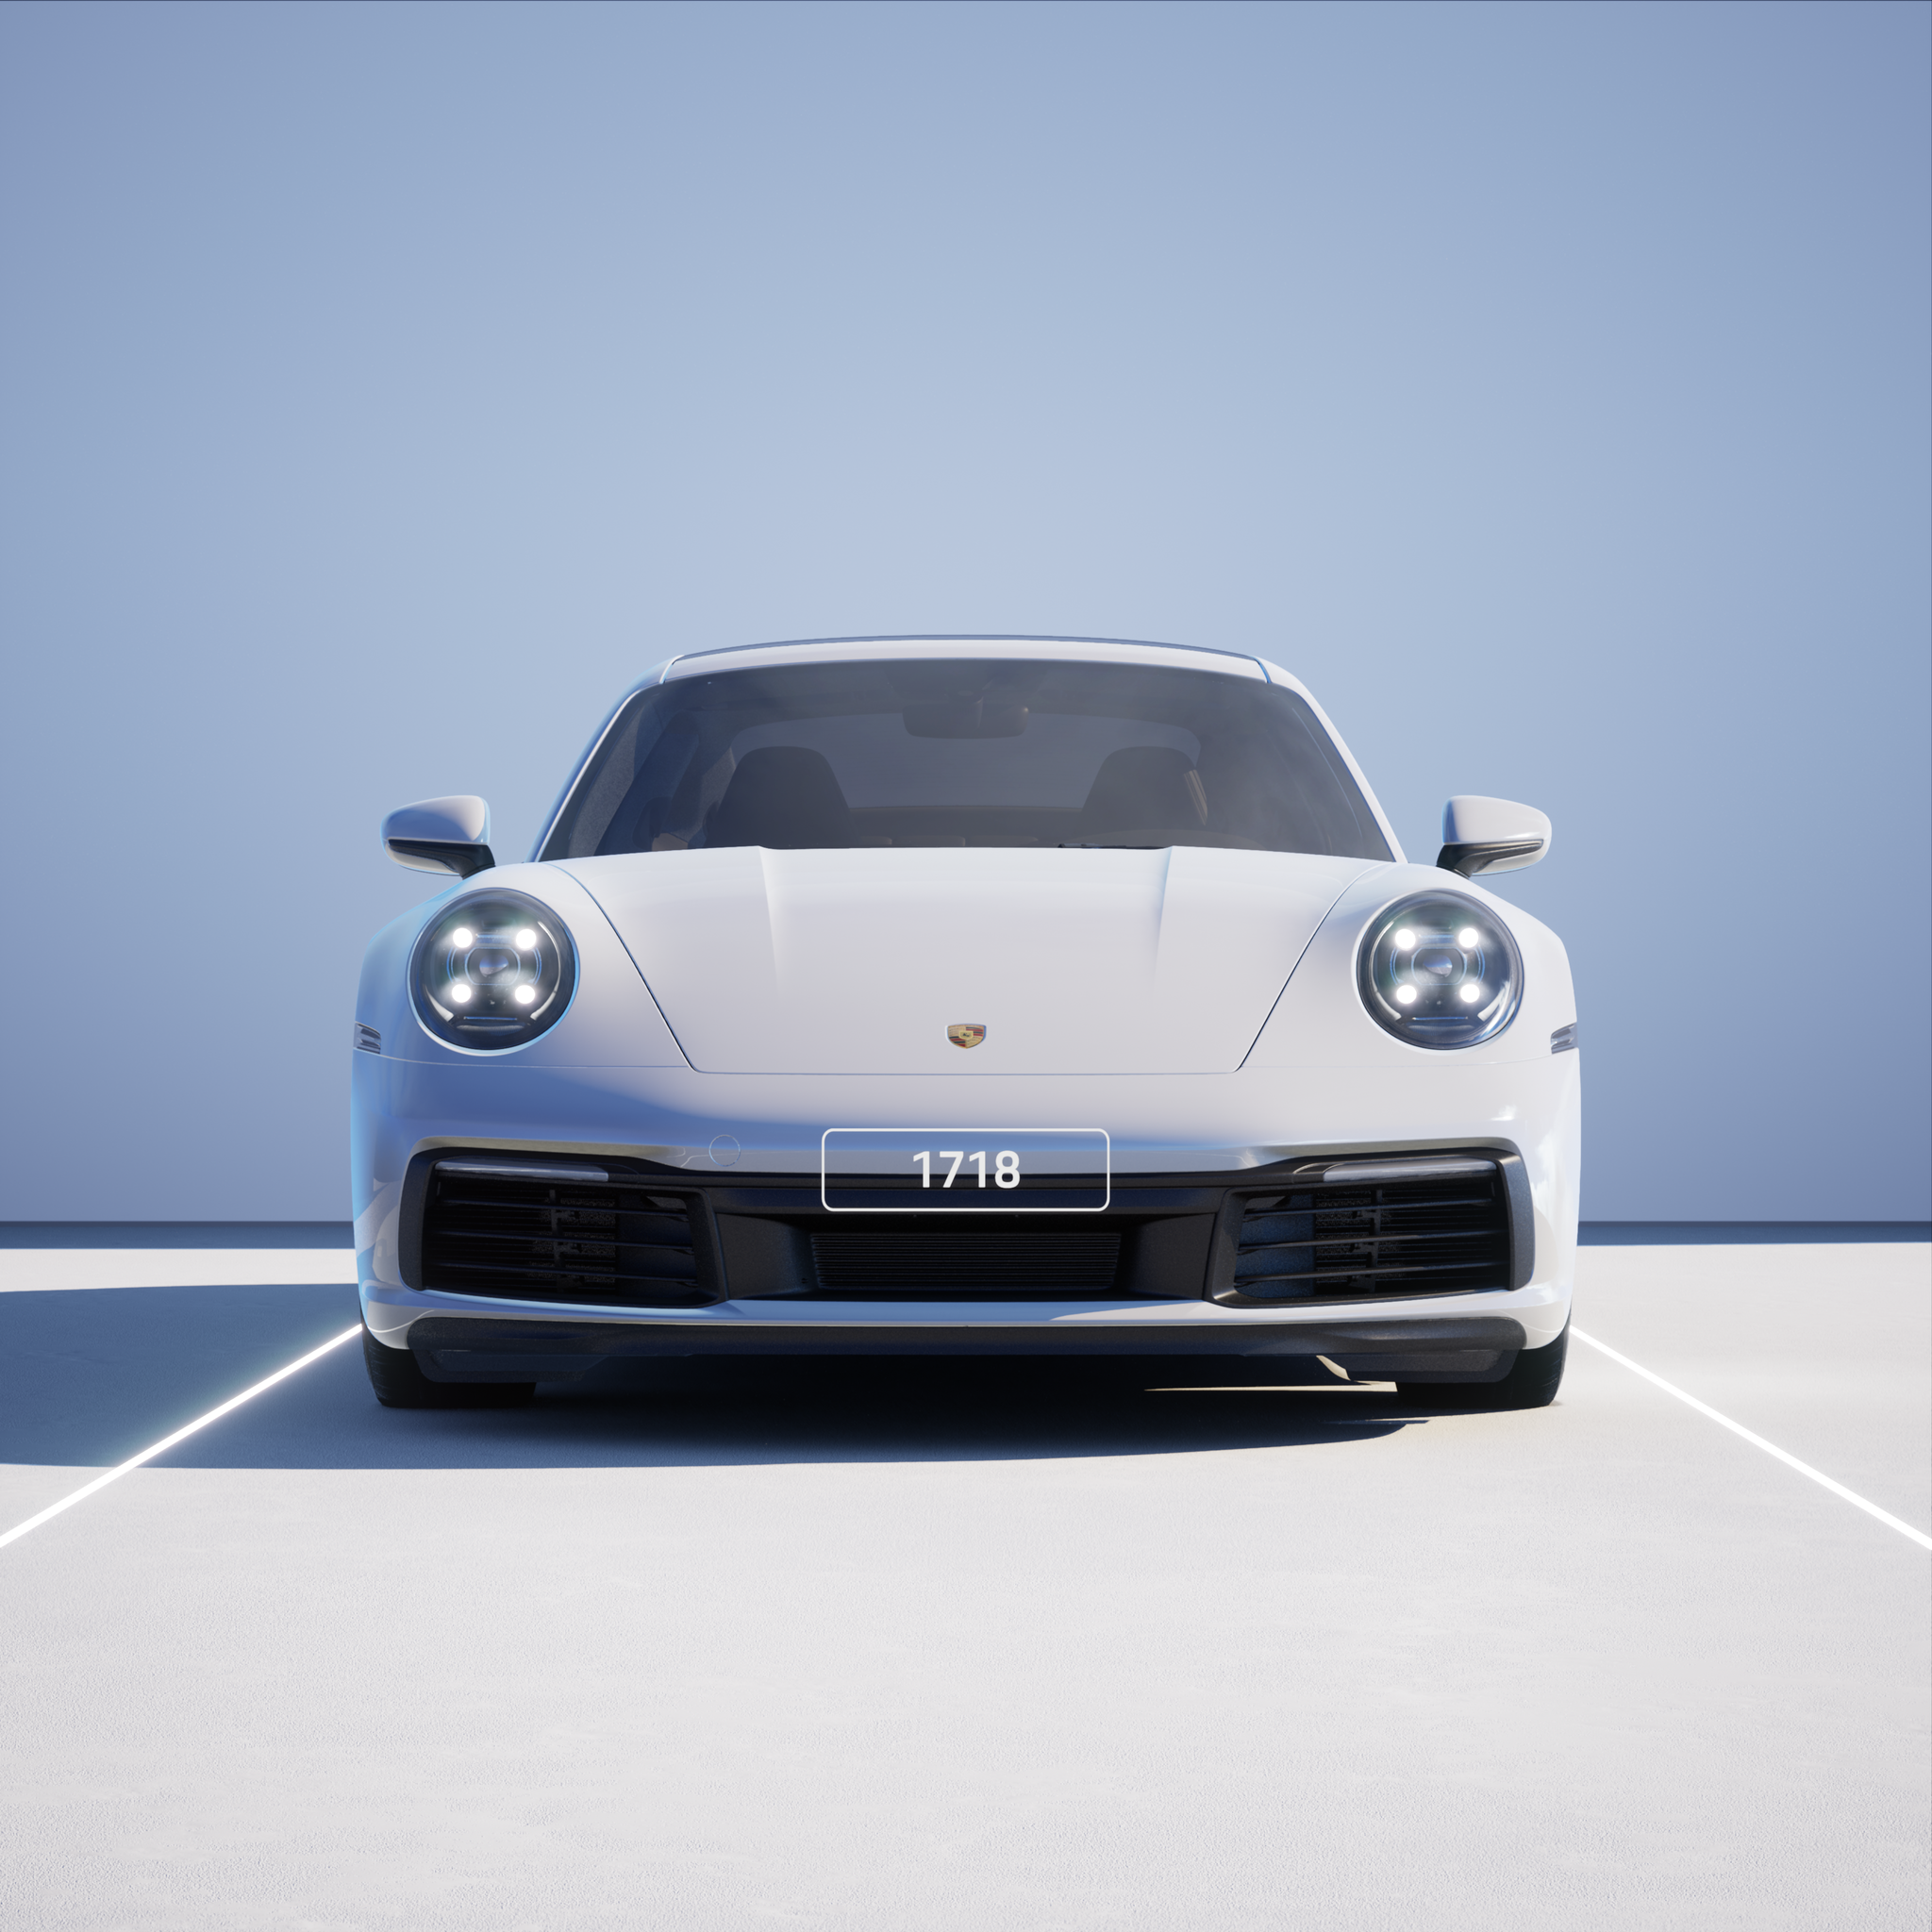 The PORSCHΞ 911 1718 image in phase